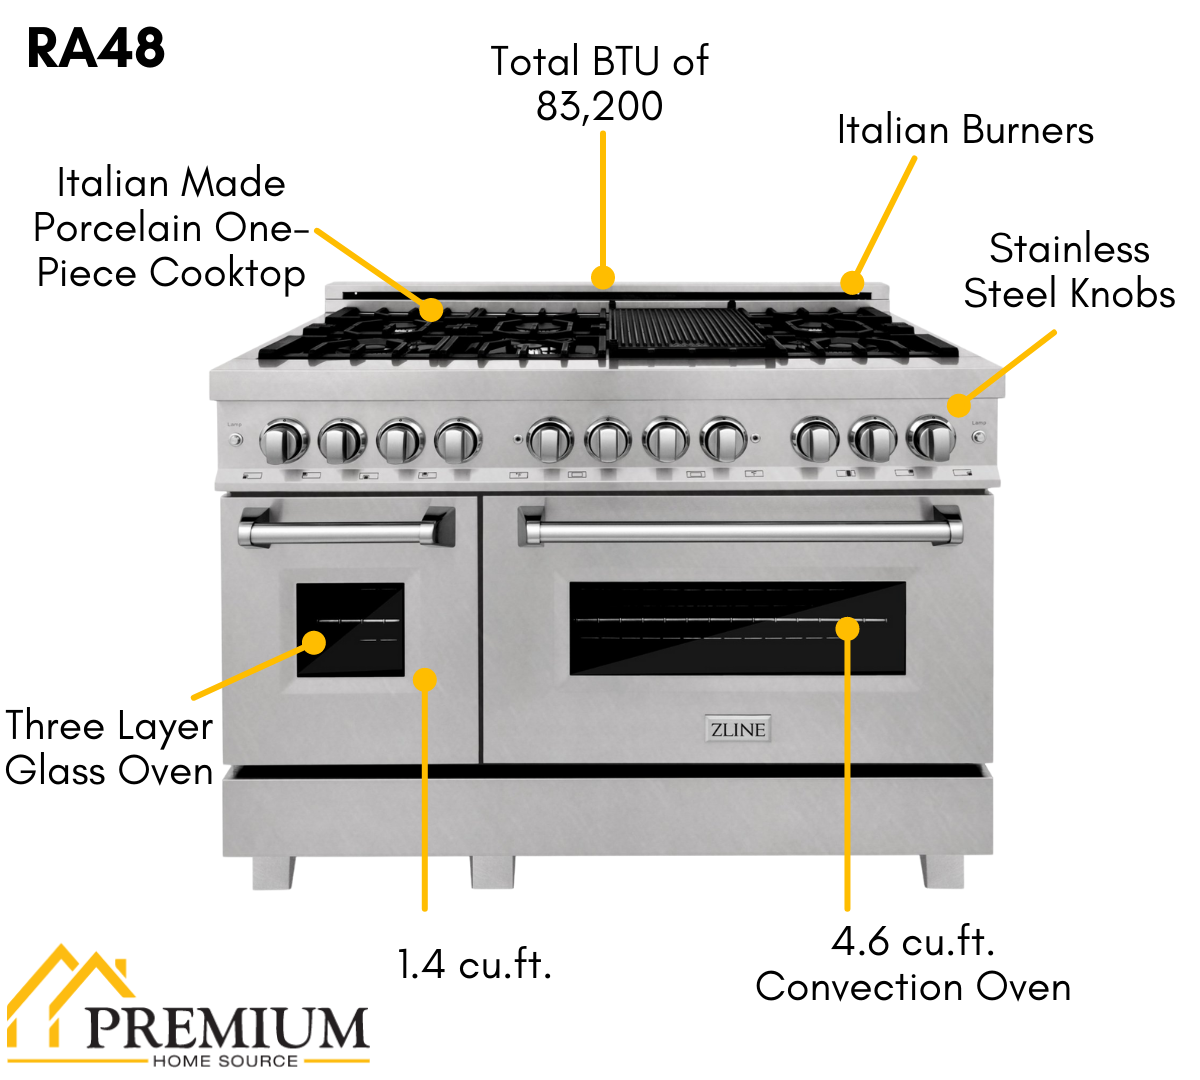 ZLINE Kitchen Package with Refrigeration, 48" Stainless Steel Dual Fuel Range, 48" Convertible Vent Range Hood and 24" Tall Tub Dishwasher